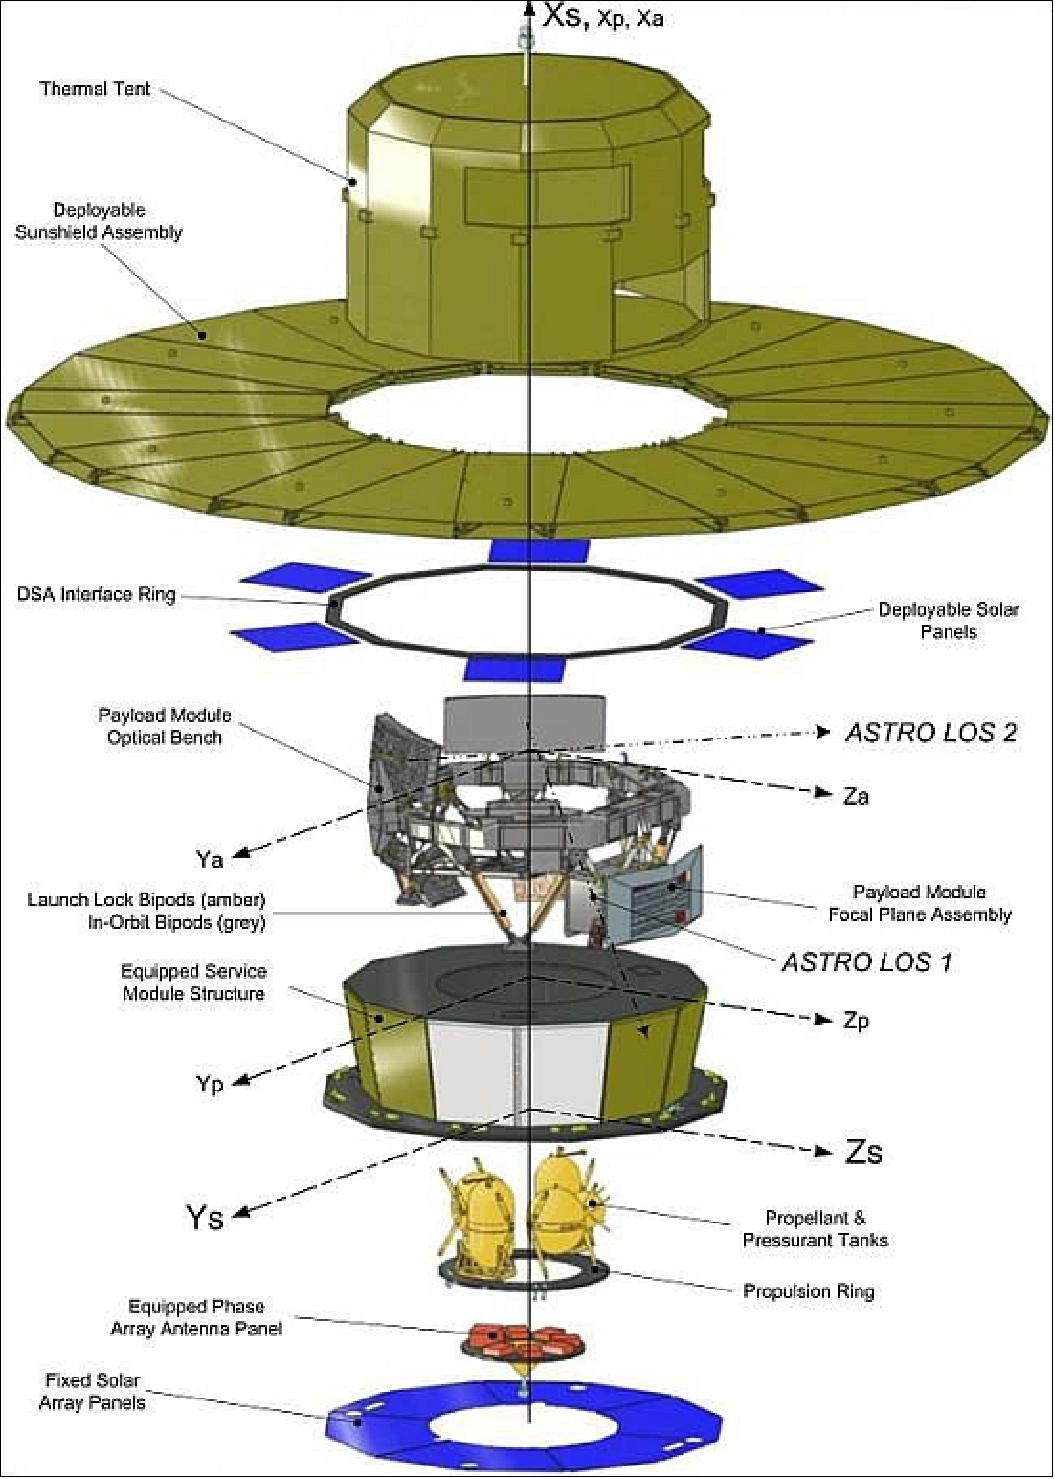 Figure 14: Exploded view of the Gaia spacecraft (image credit: EADS Astrium)